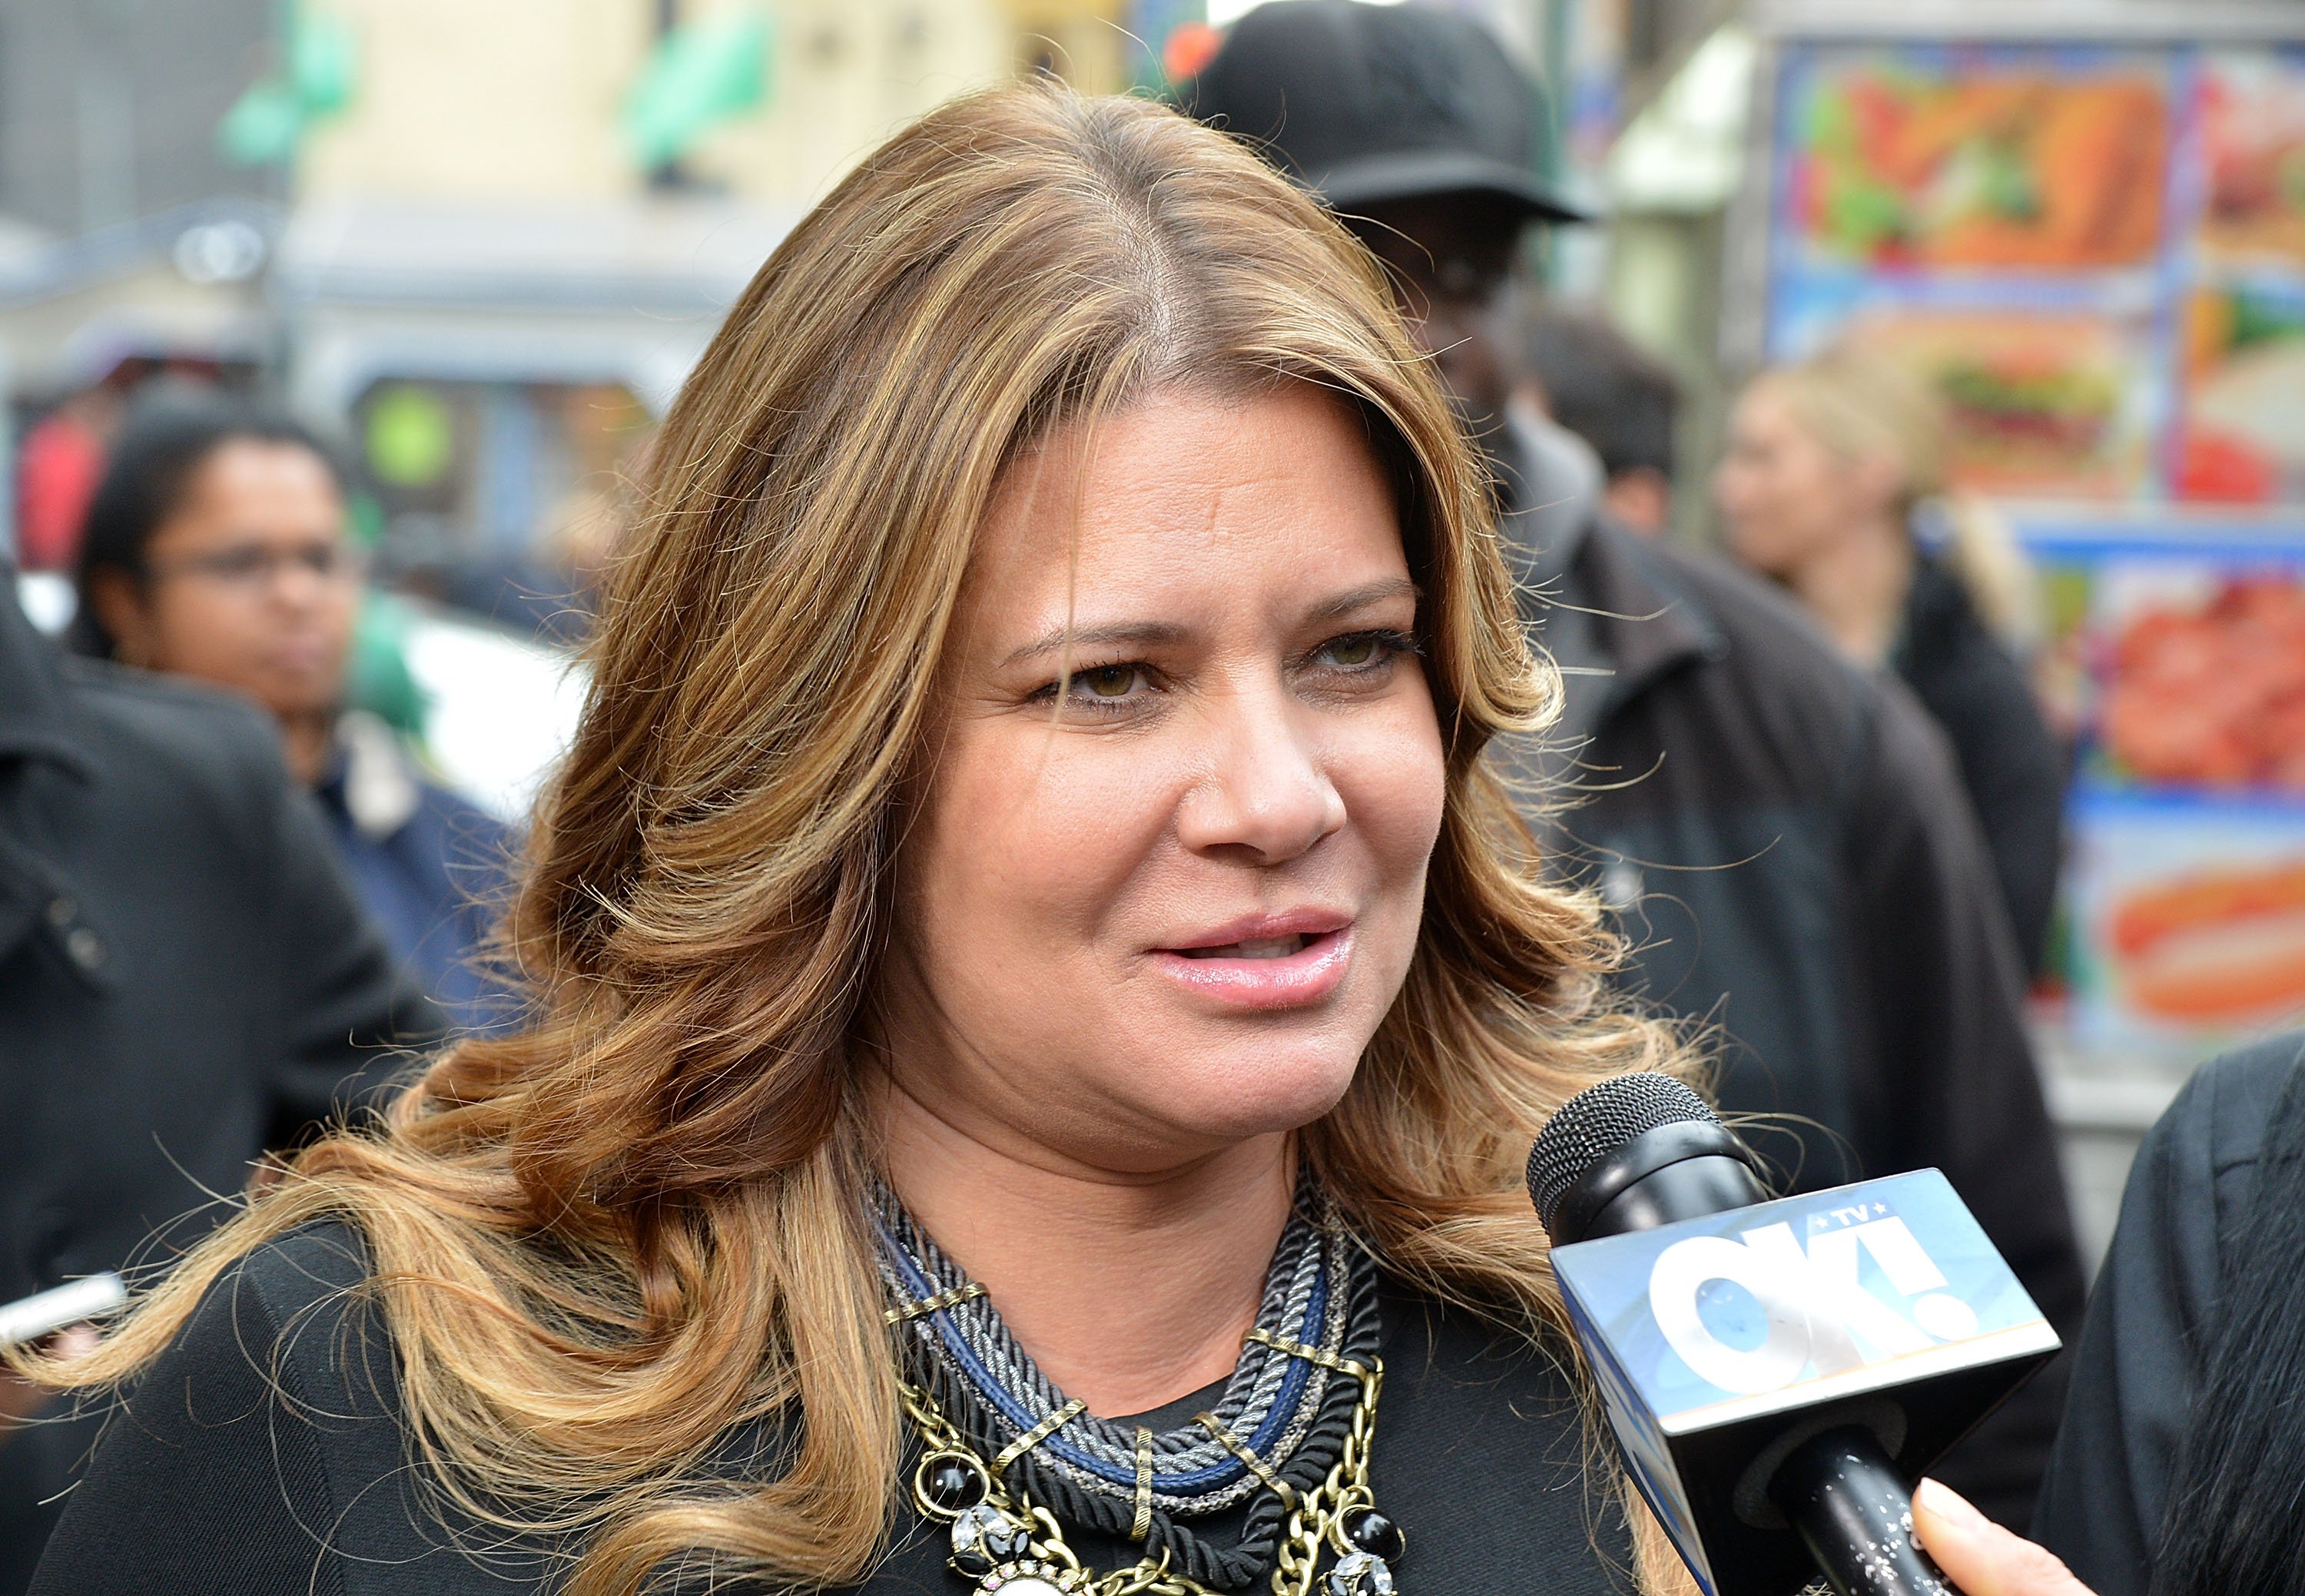 TV personality Karen Gravano from 'Families of the Mafia' and 'Mob Wives'